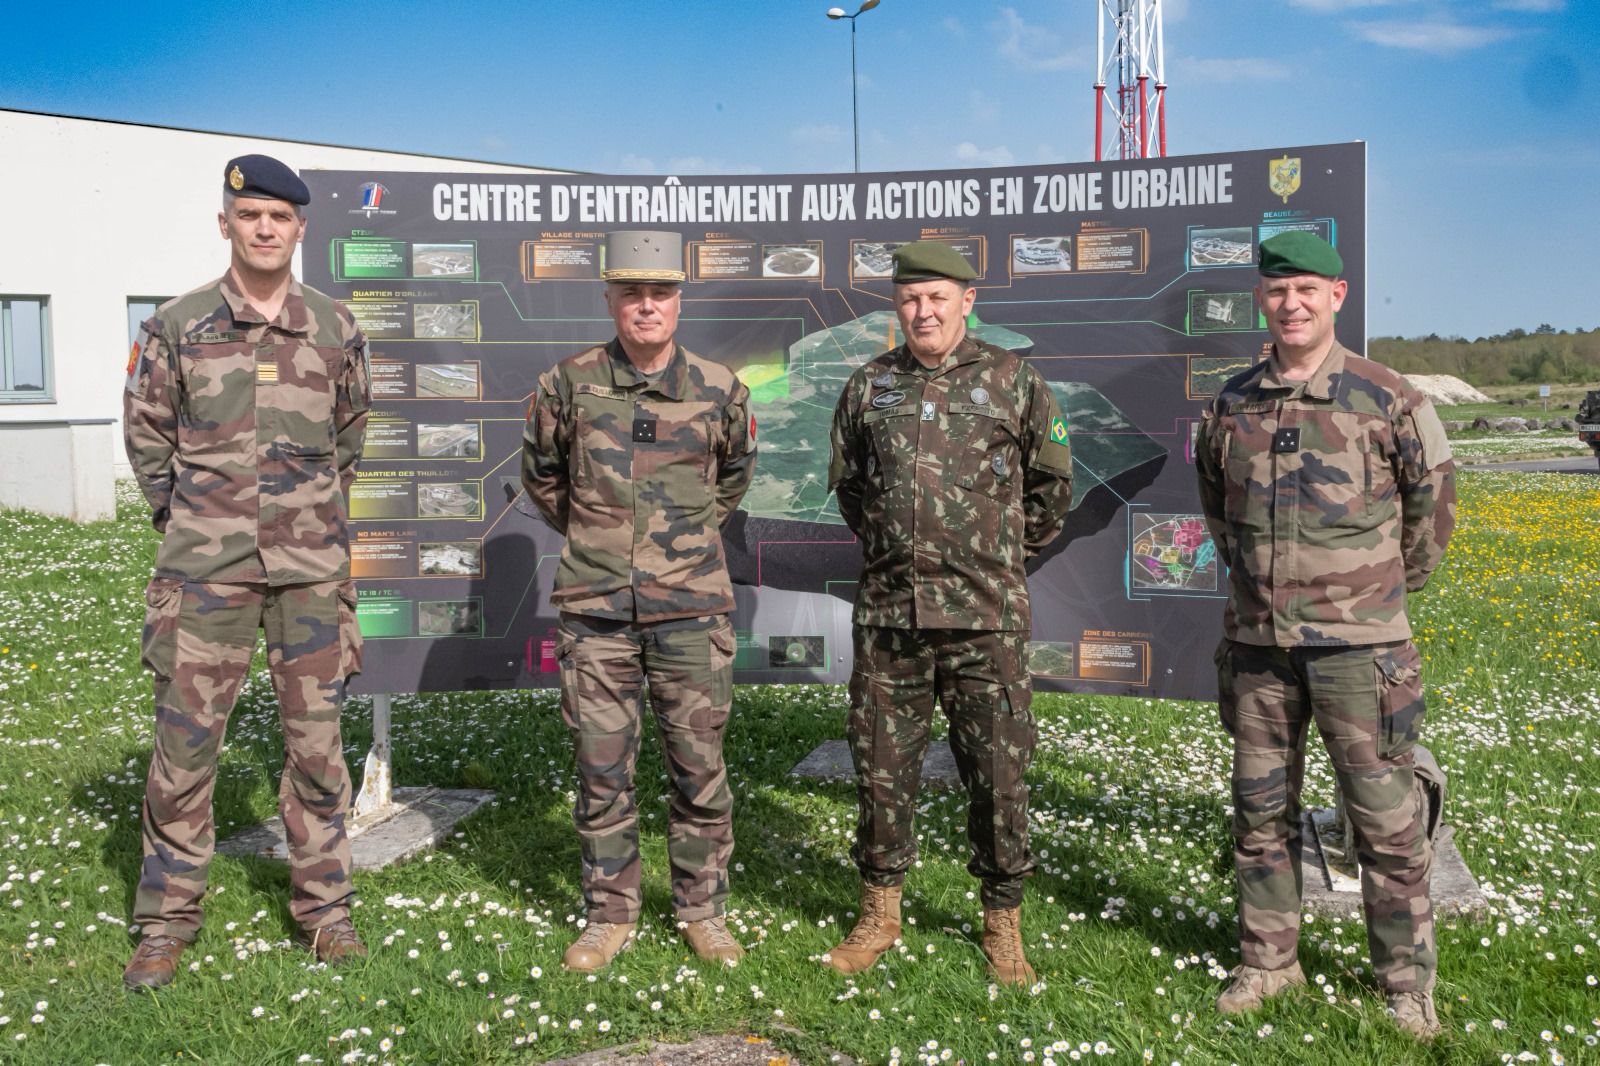 Brazilian army commander visited France and Poland